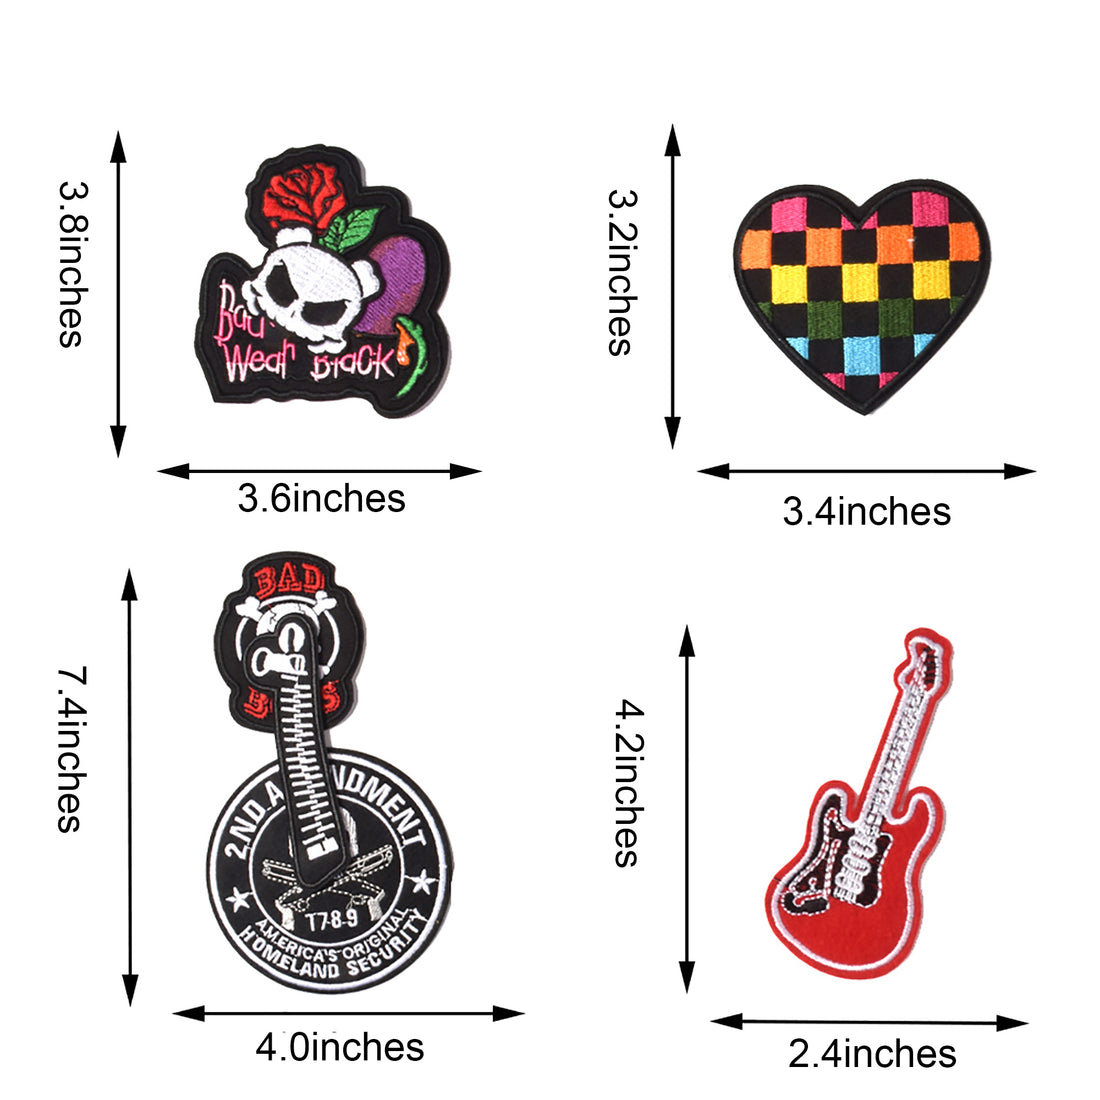 Embroidered Iron on Patches, Cute Sewing Appliques for Jackets, Hats, Backpacks, Jeans, DIY Accessories, Music 18pcs